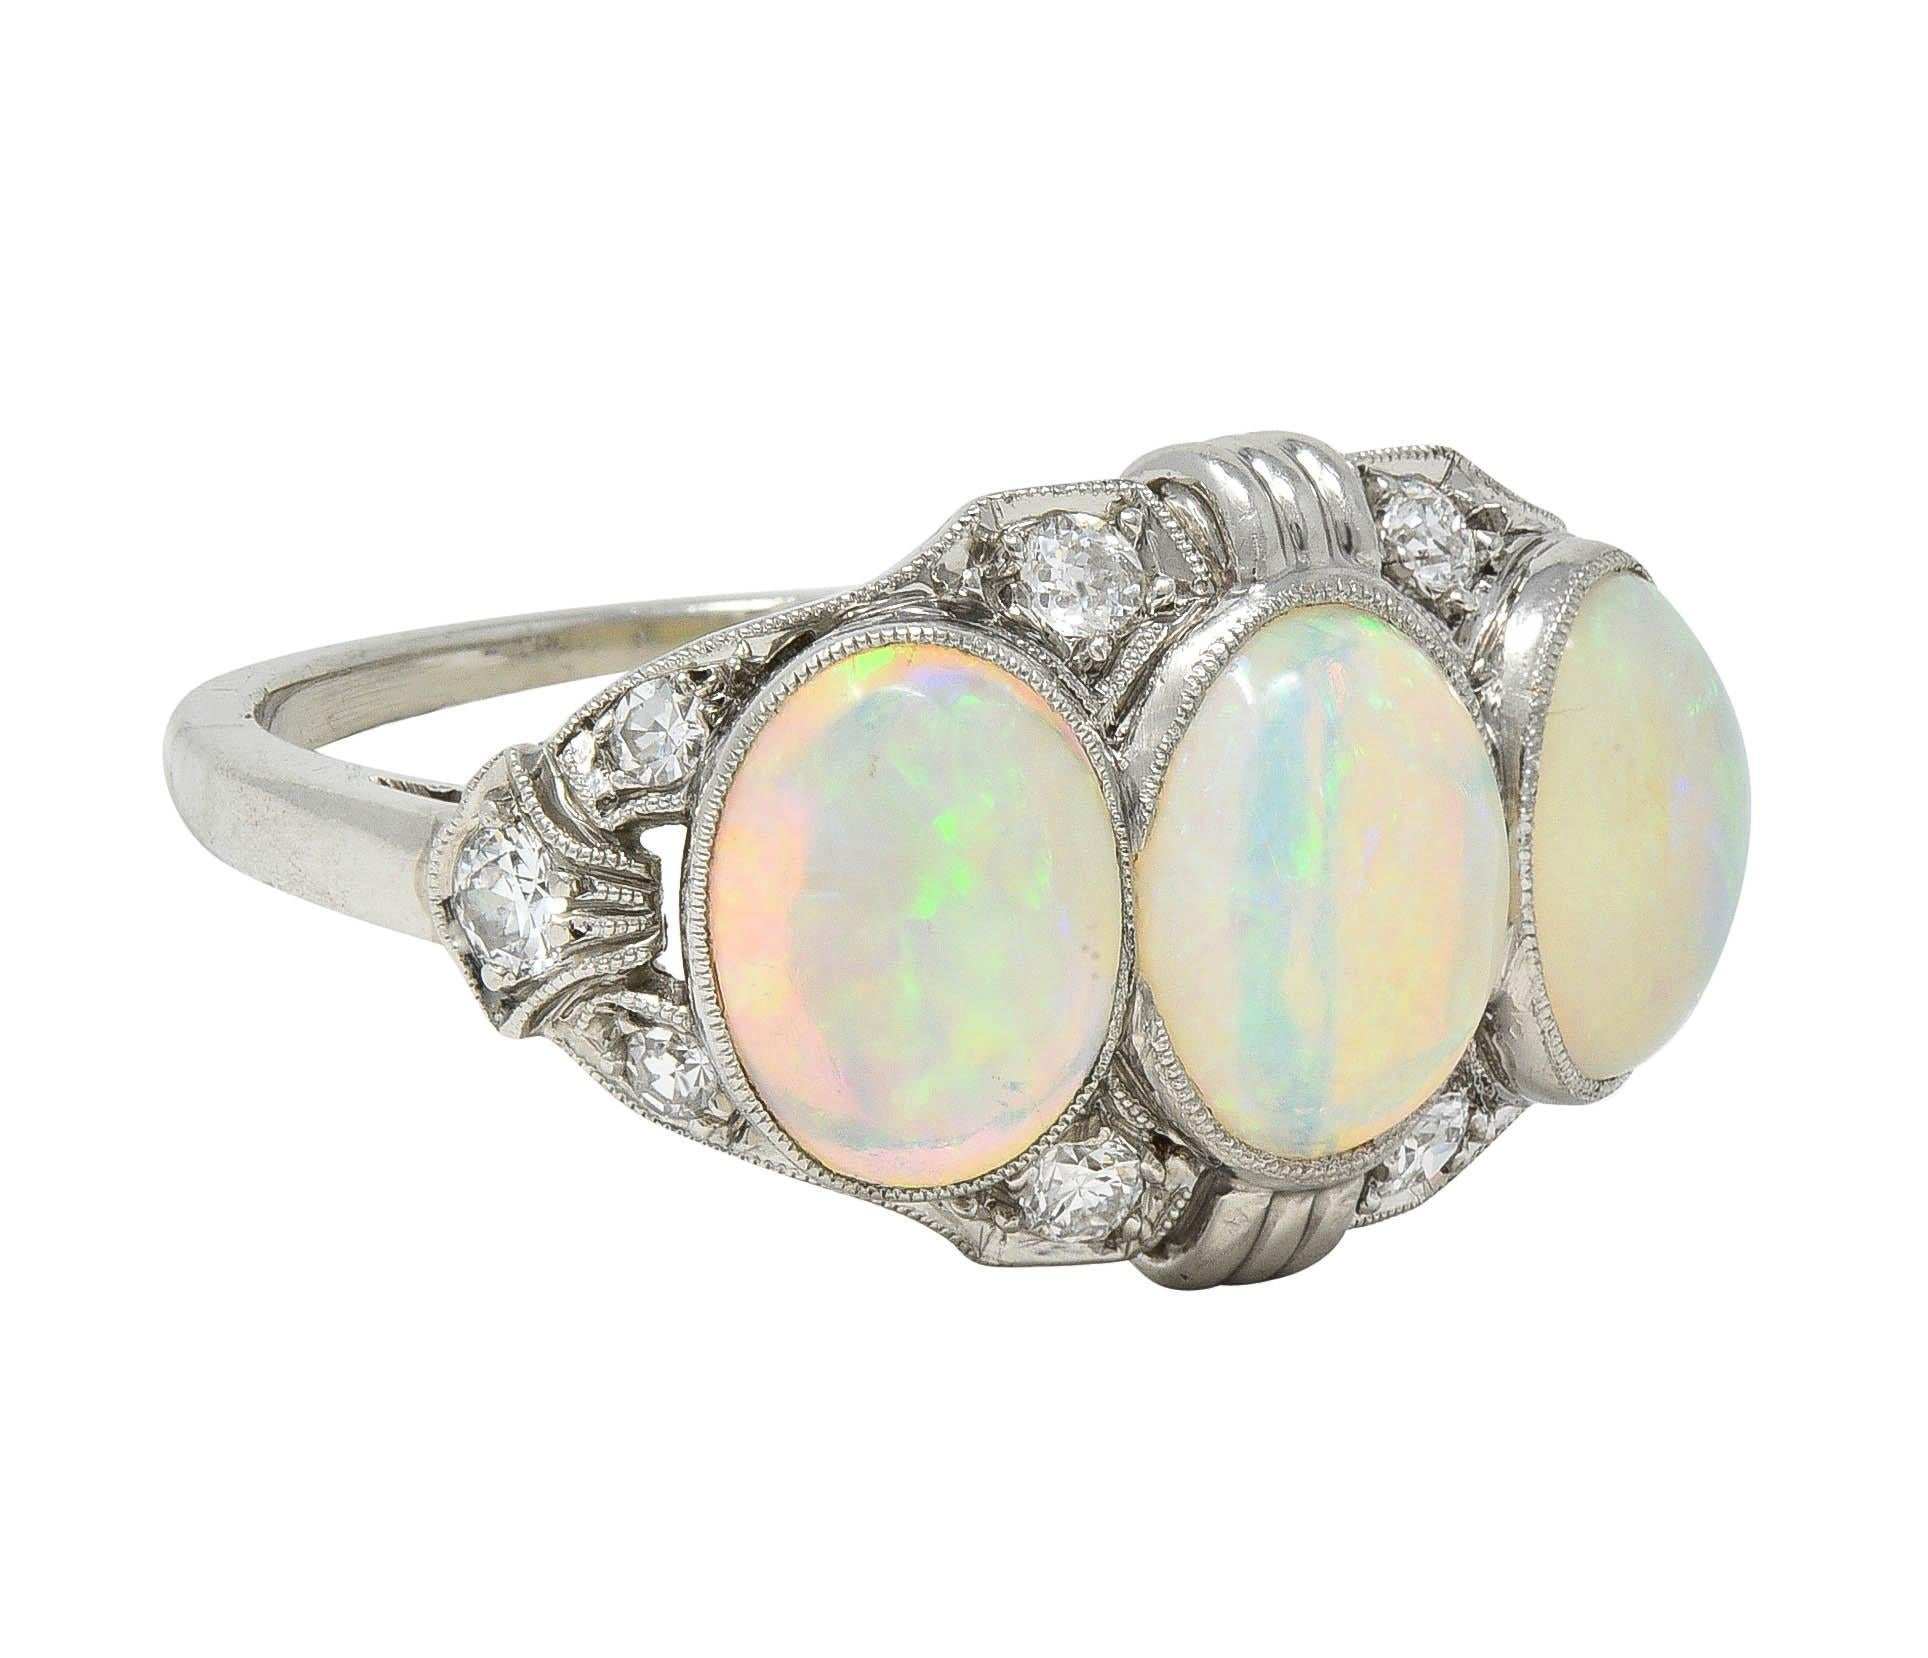 Late Art Deco Opal Cabochon Diamond Platinum Vintage Dinner Band Ring In Excellent Condition For Sale In Philadelphia, PA